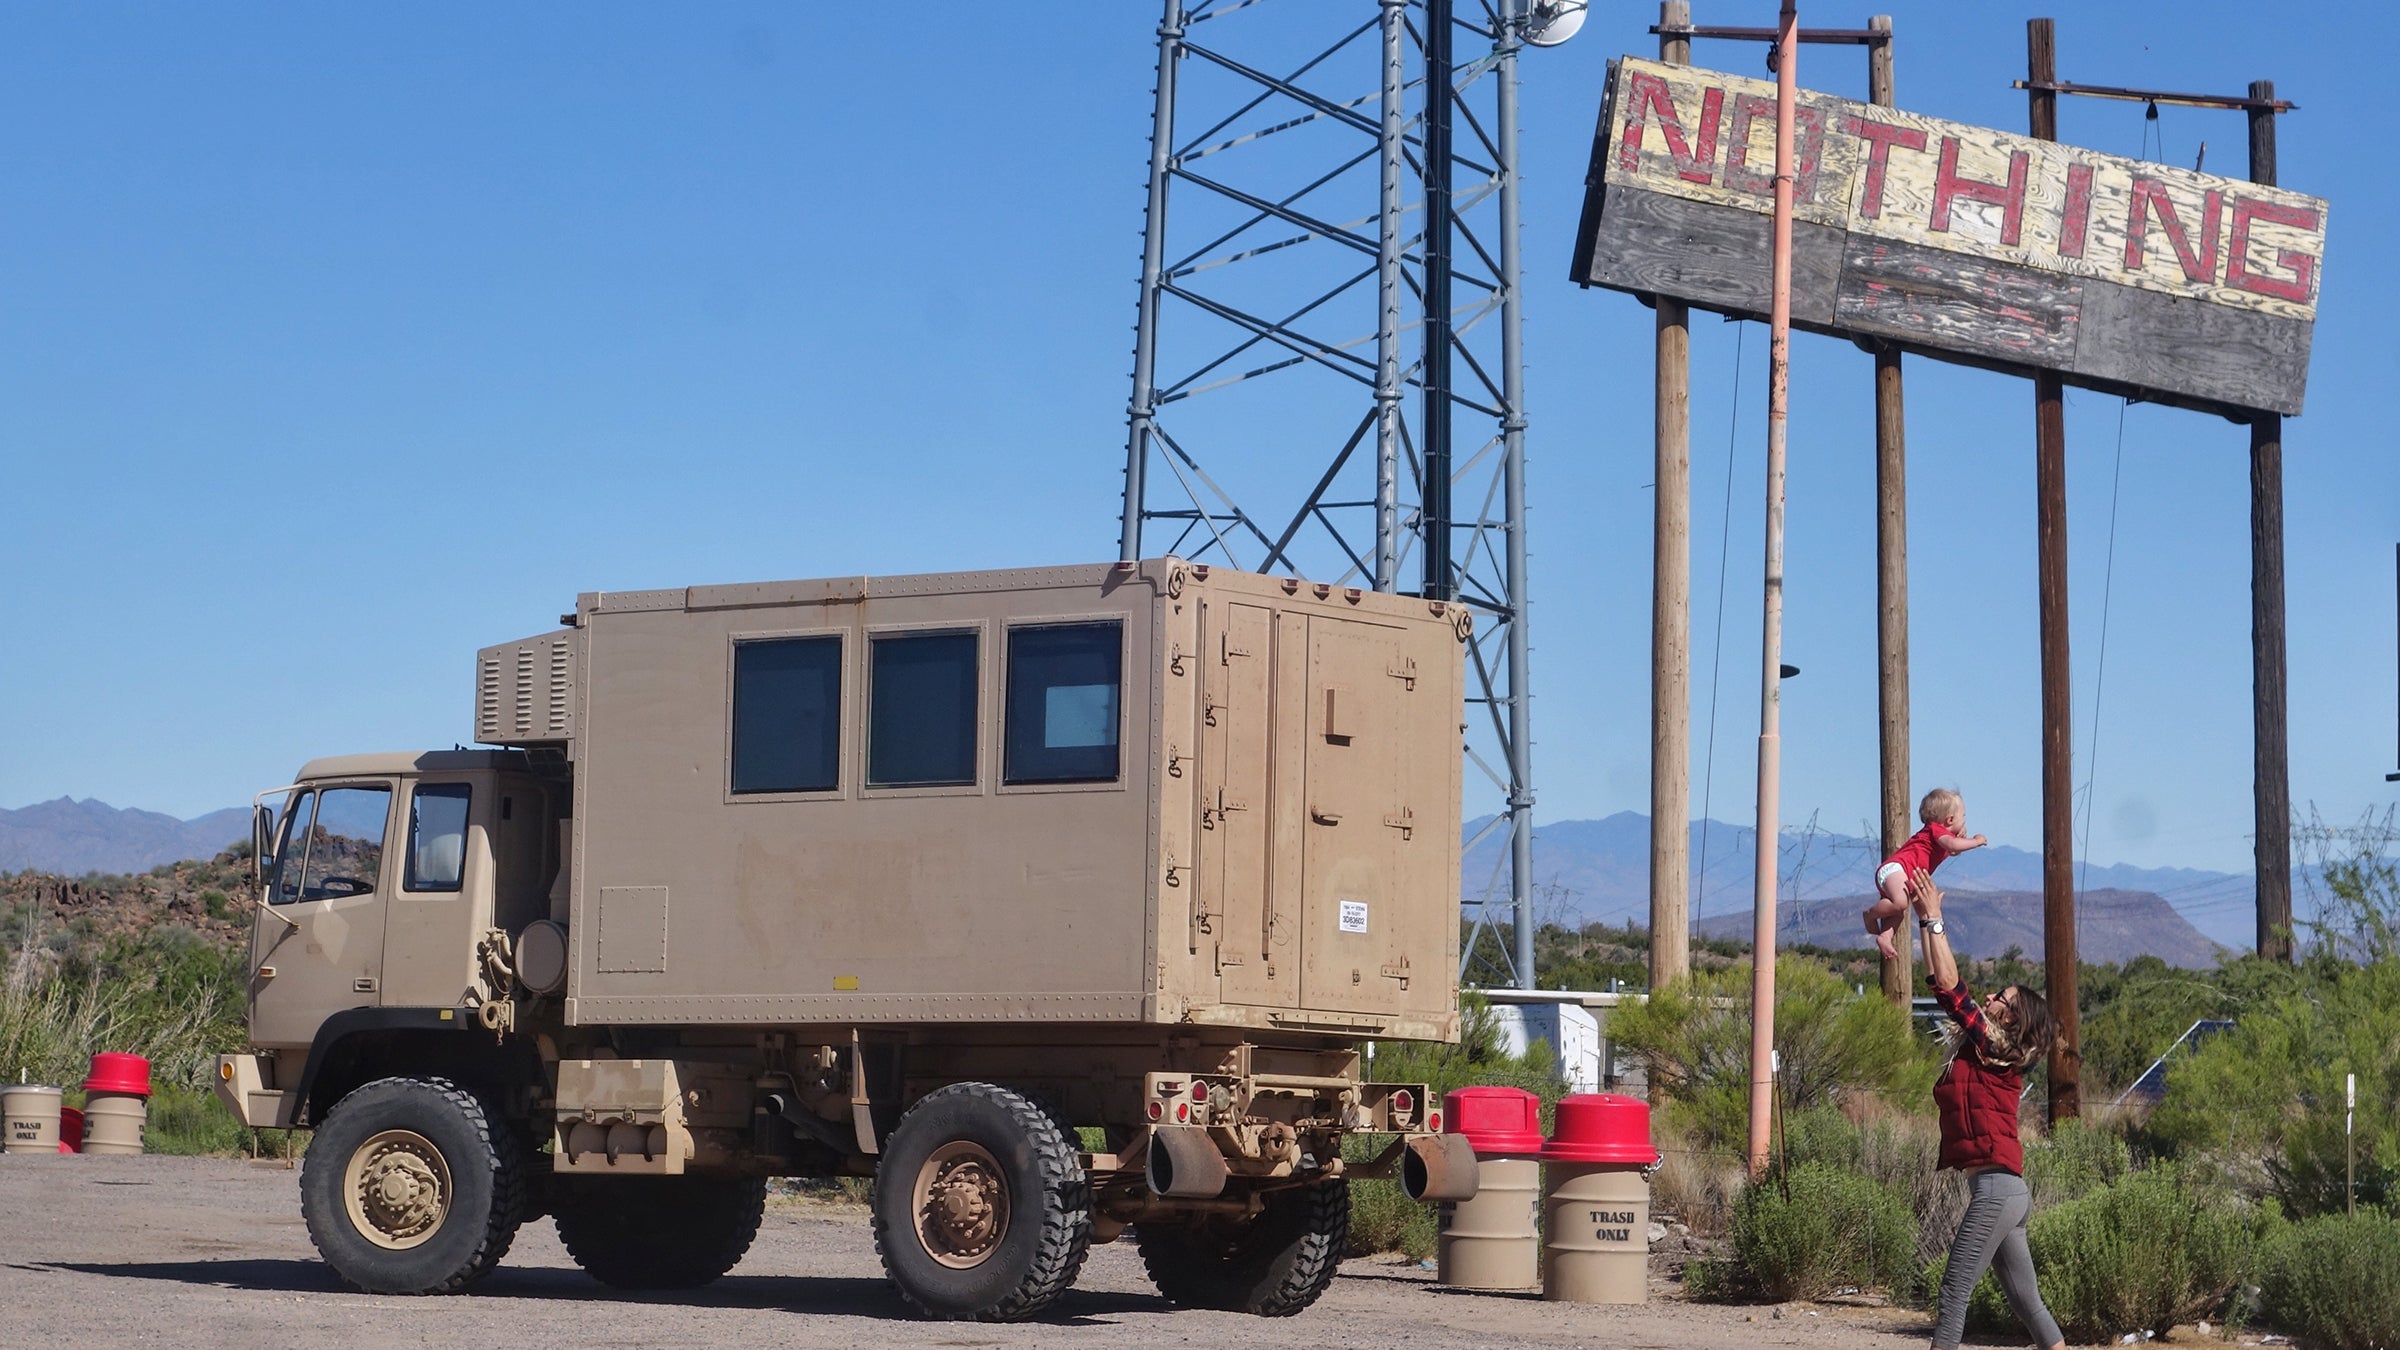 We Bought A Military Truck So You Don'T Have To - Outside Online